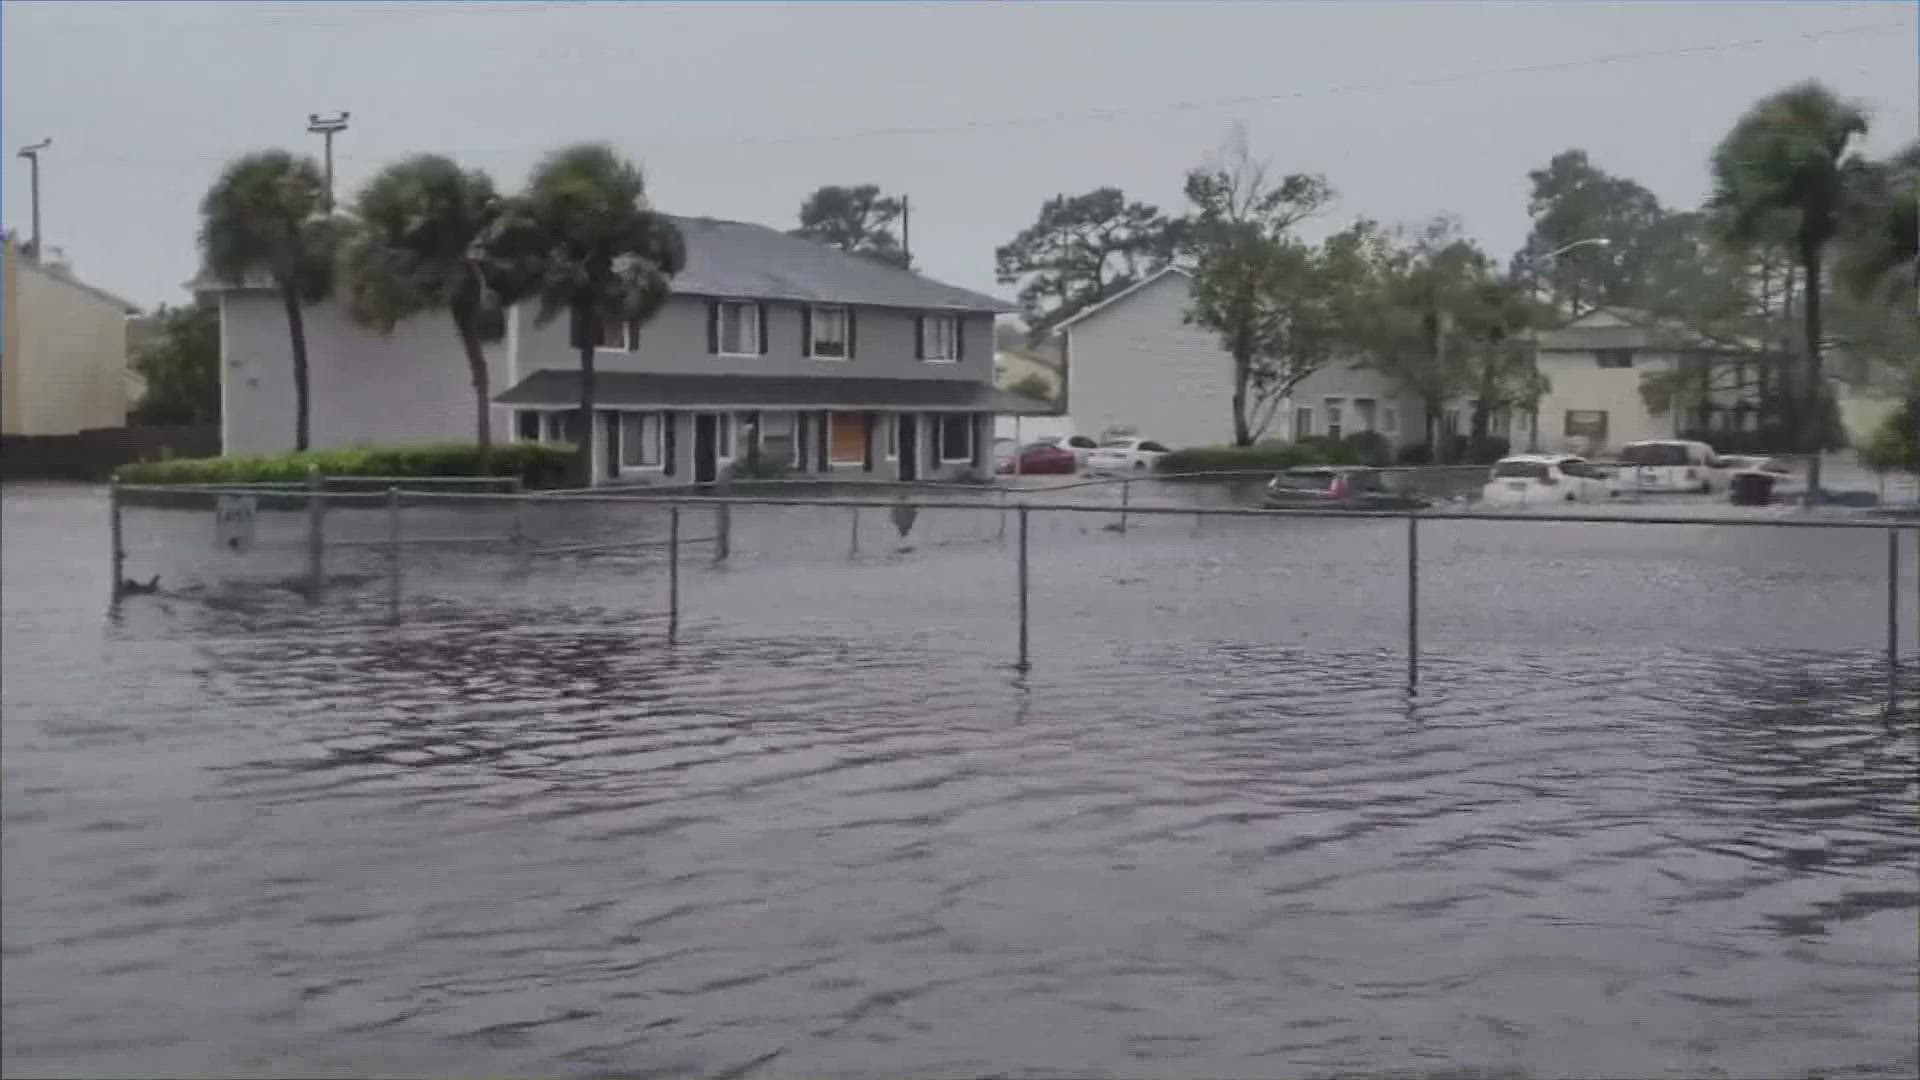 Widespread devastation and flooding has trapped residents in their homes. NBC's Chris Pollone reports from Tampa.